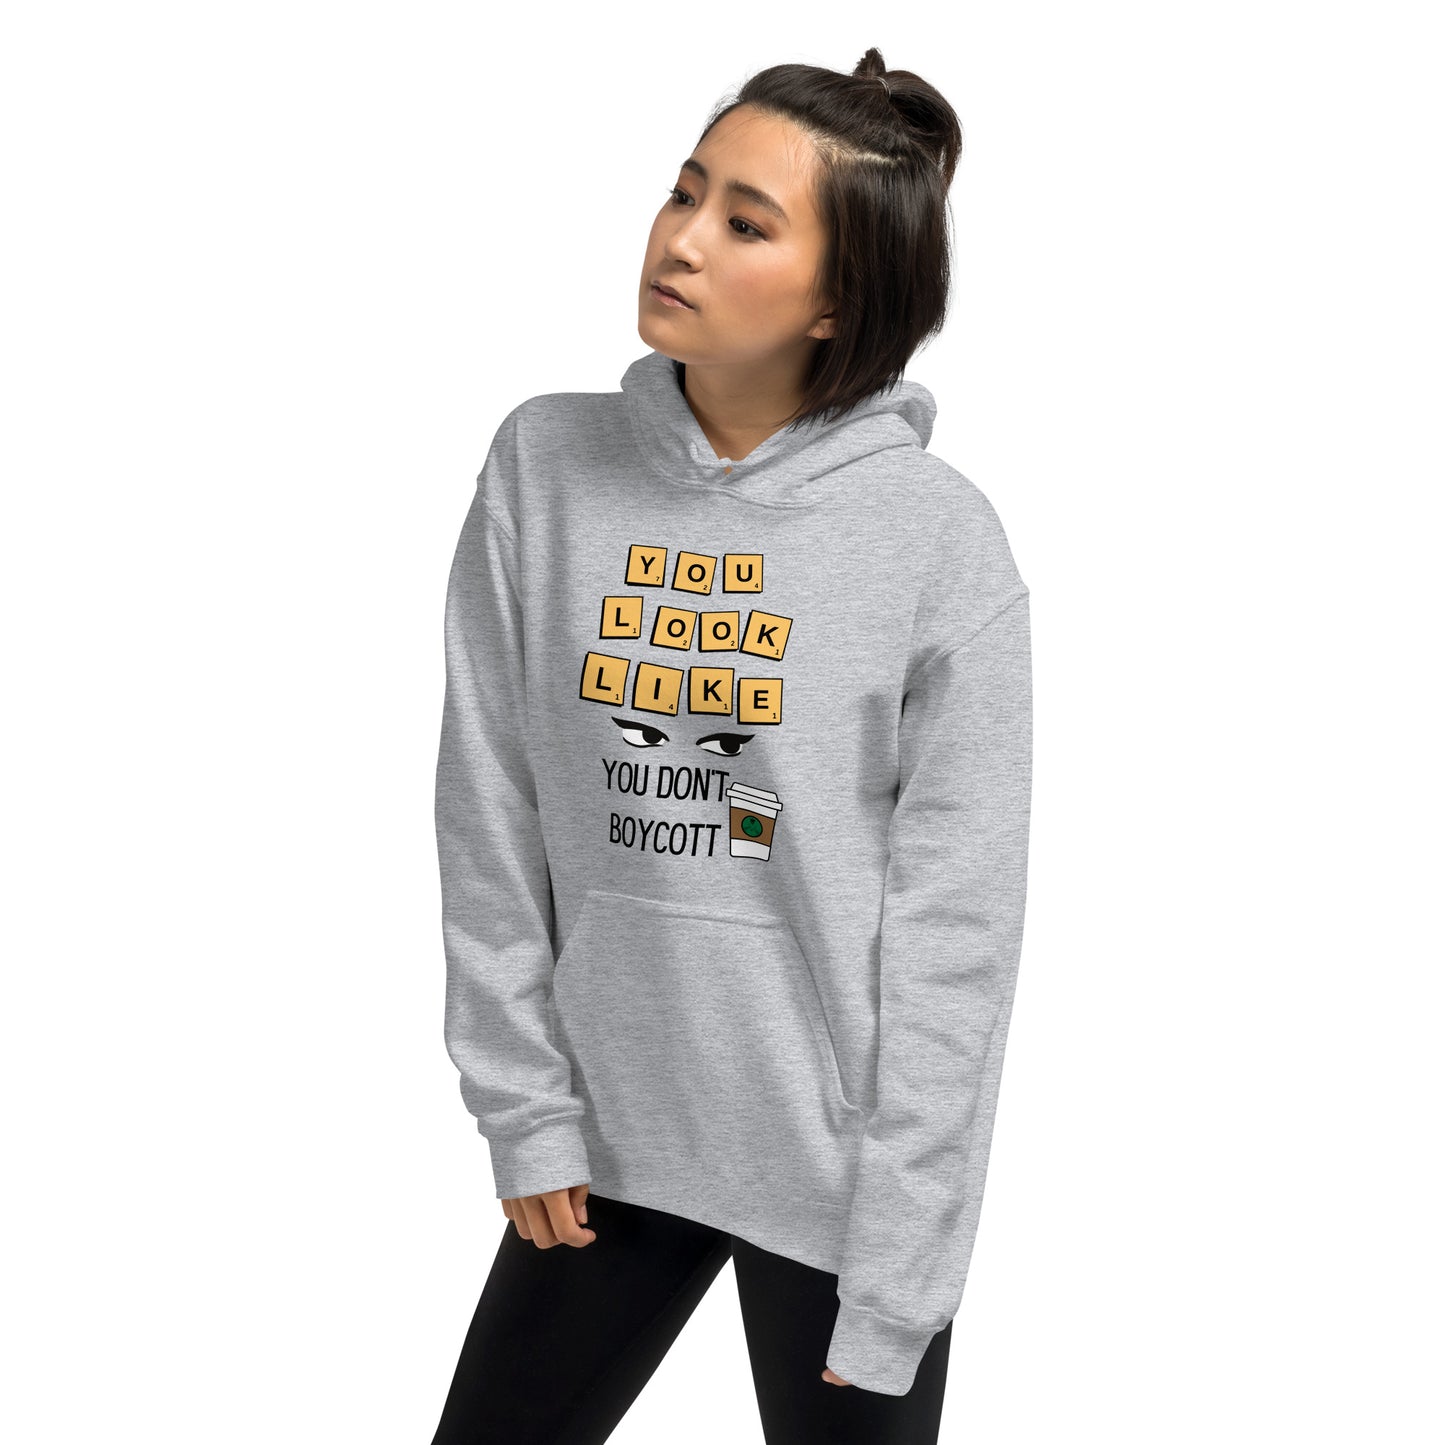 You Look Like (YOU DON'T) Hoodie